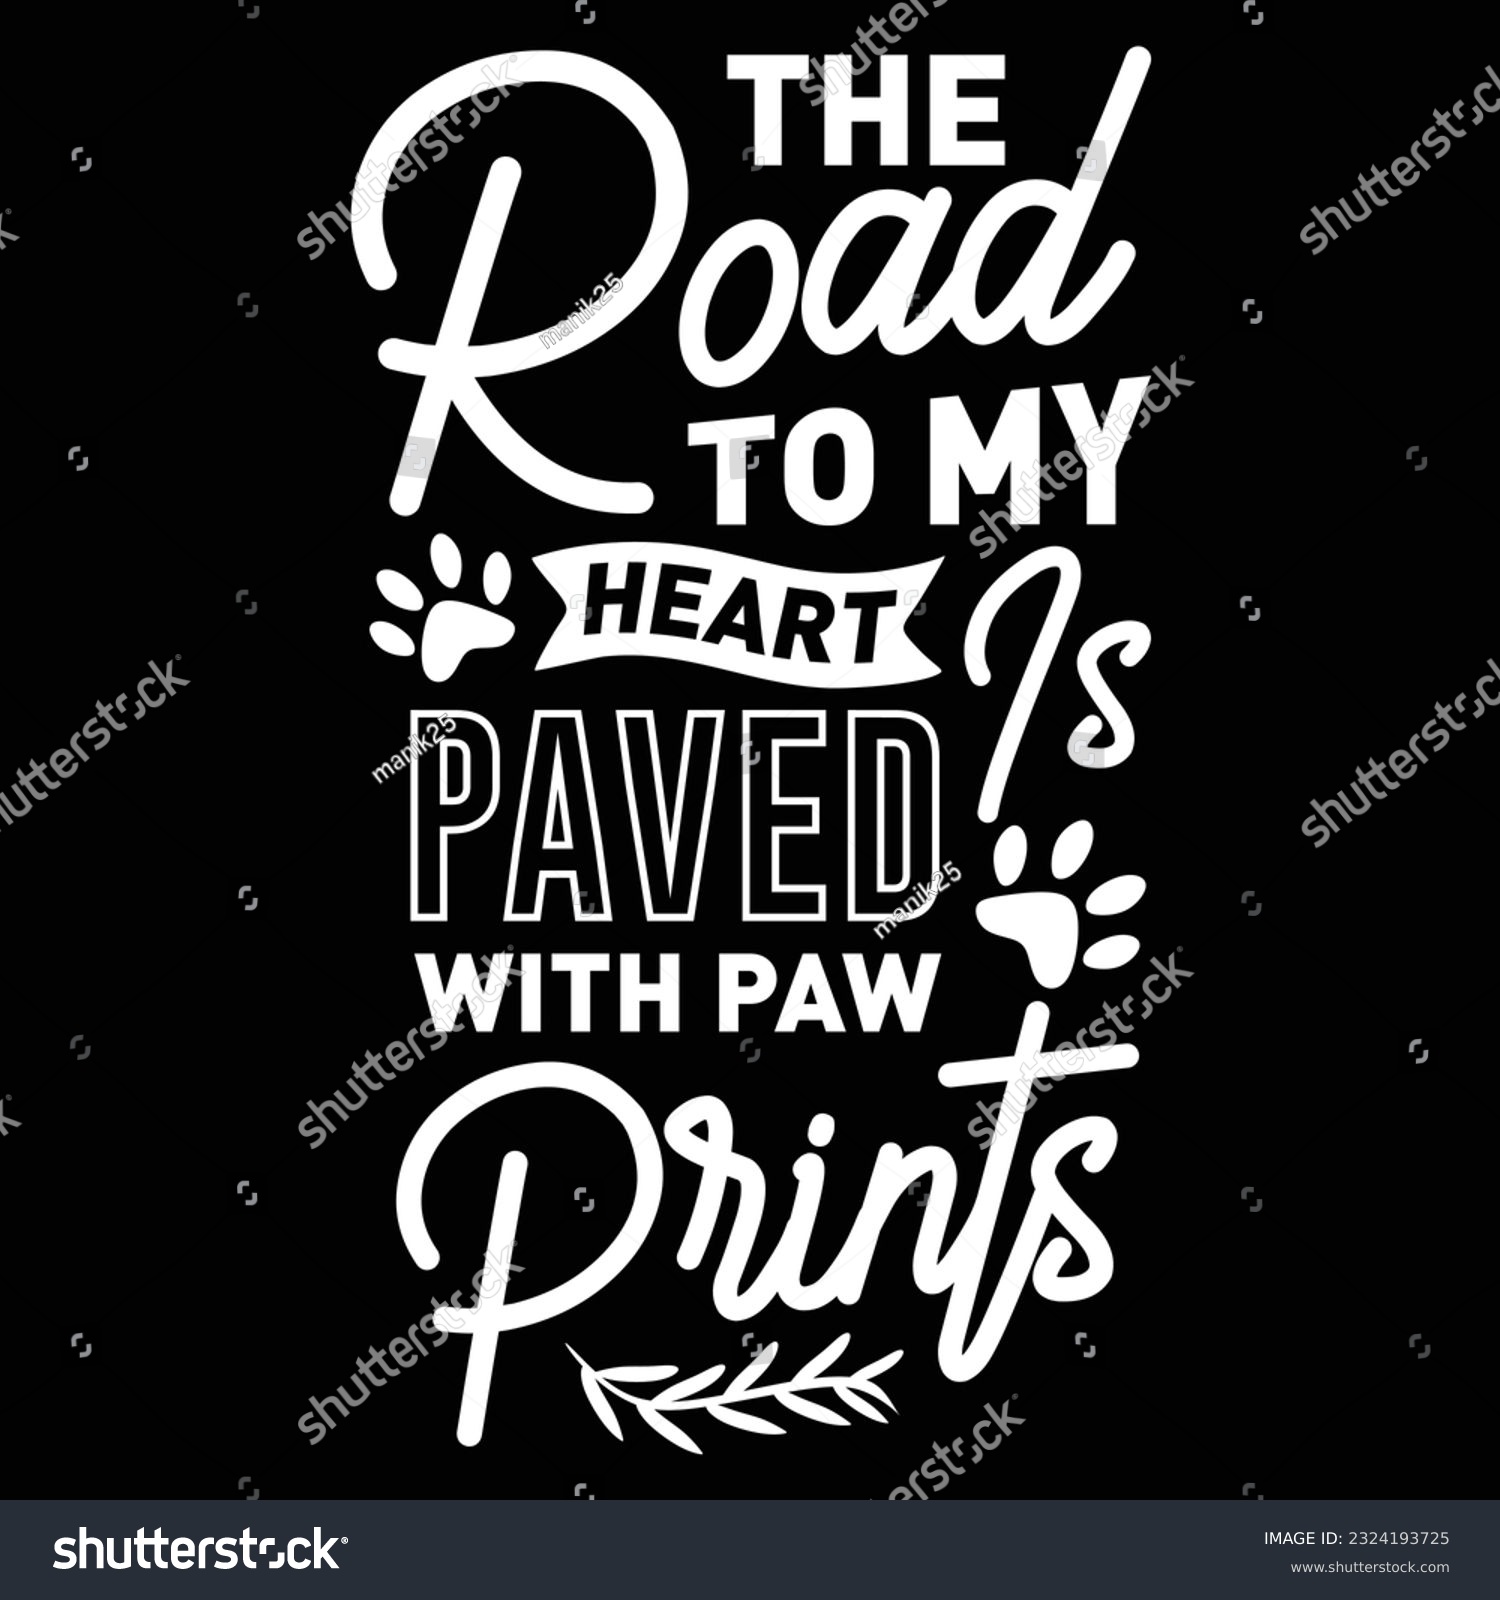 SVG of The Road to My Heart Paved With Paw Prints, svg design vector file svg